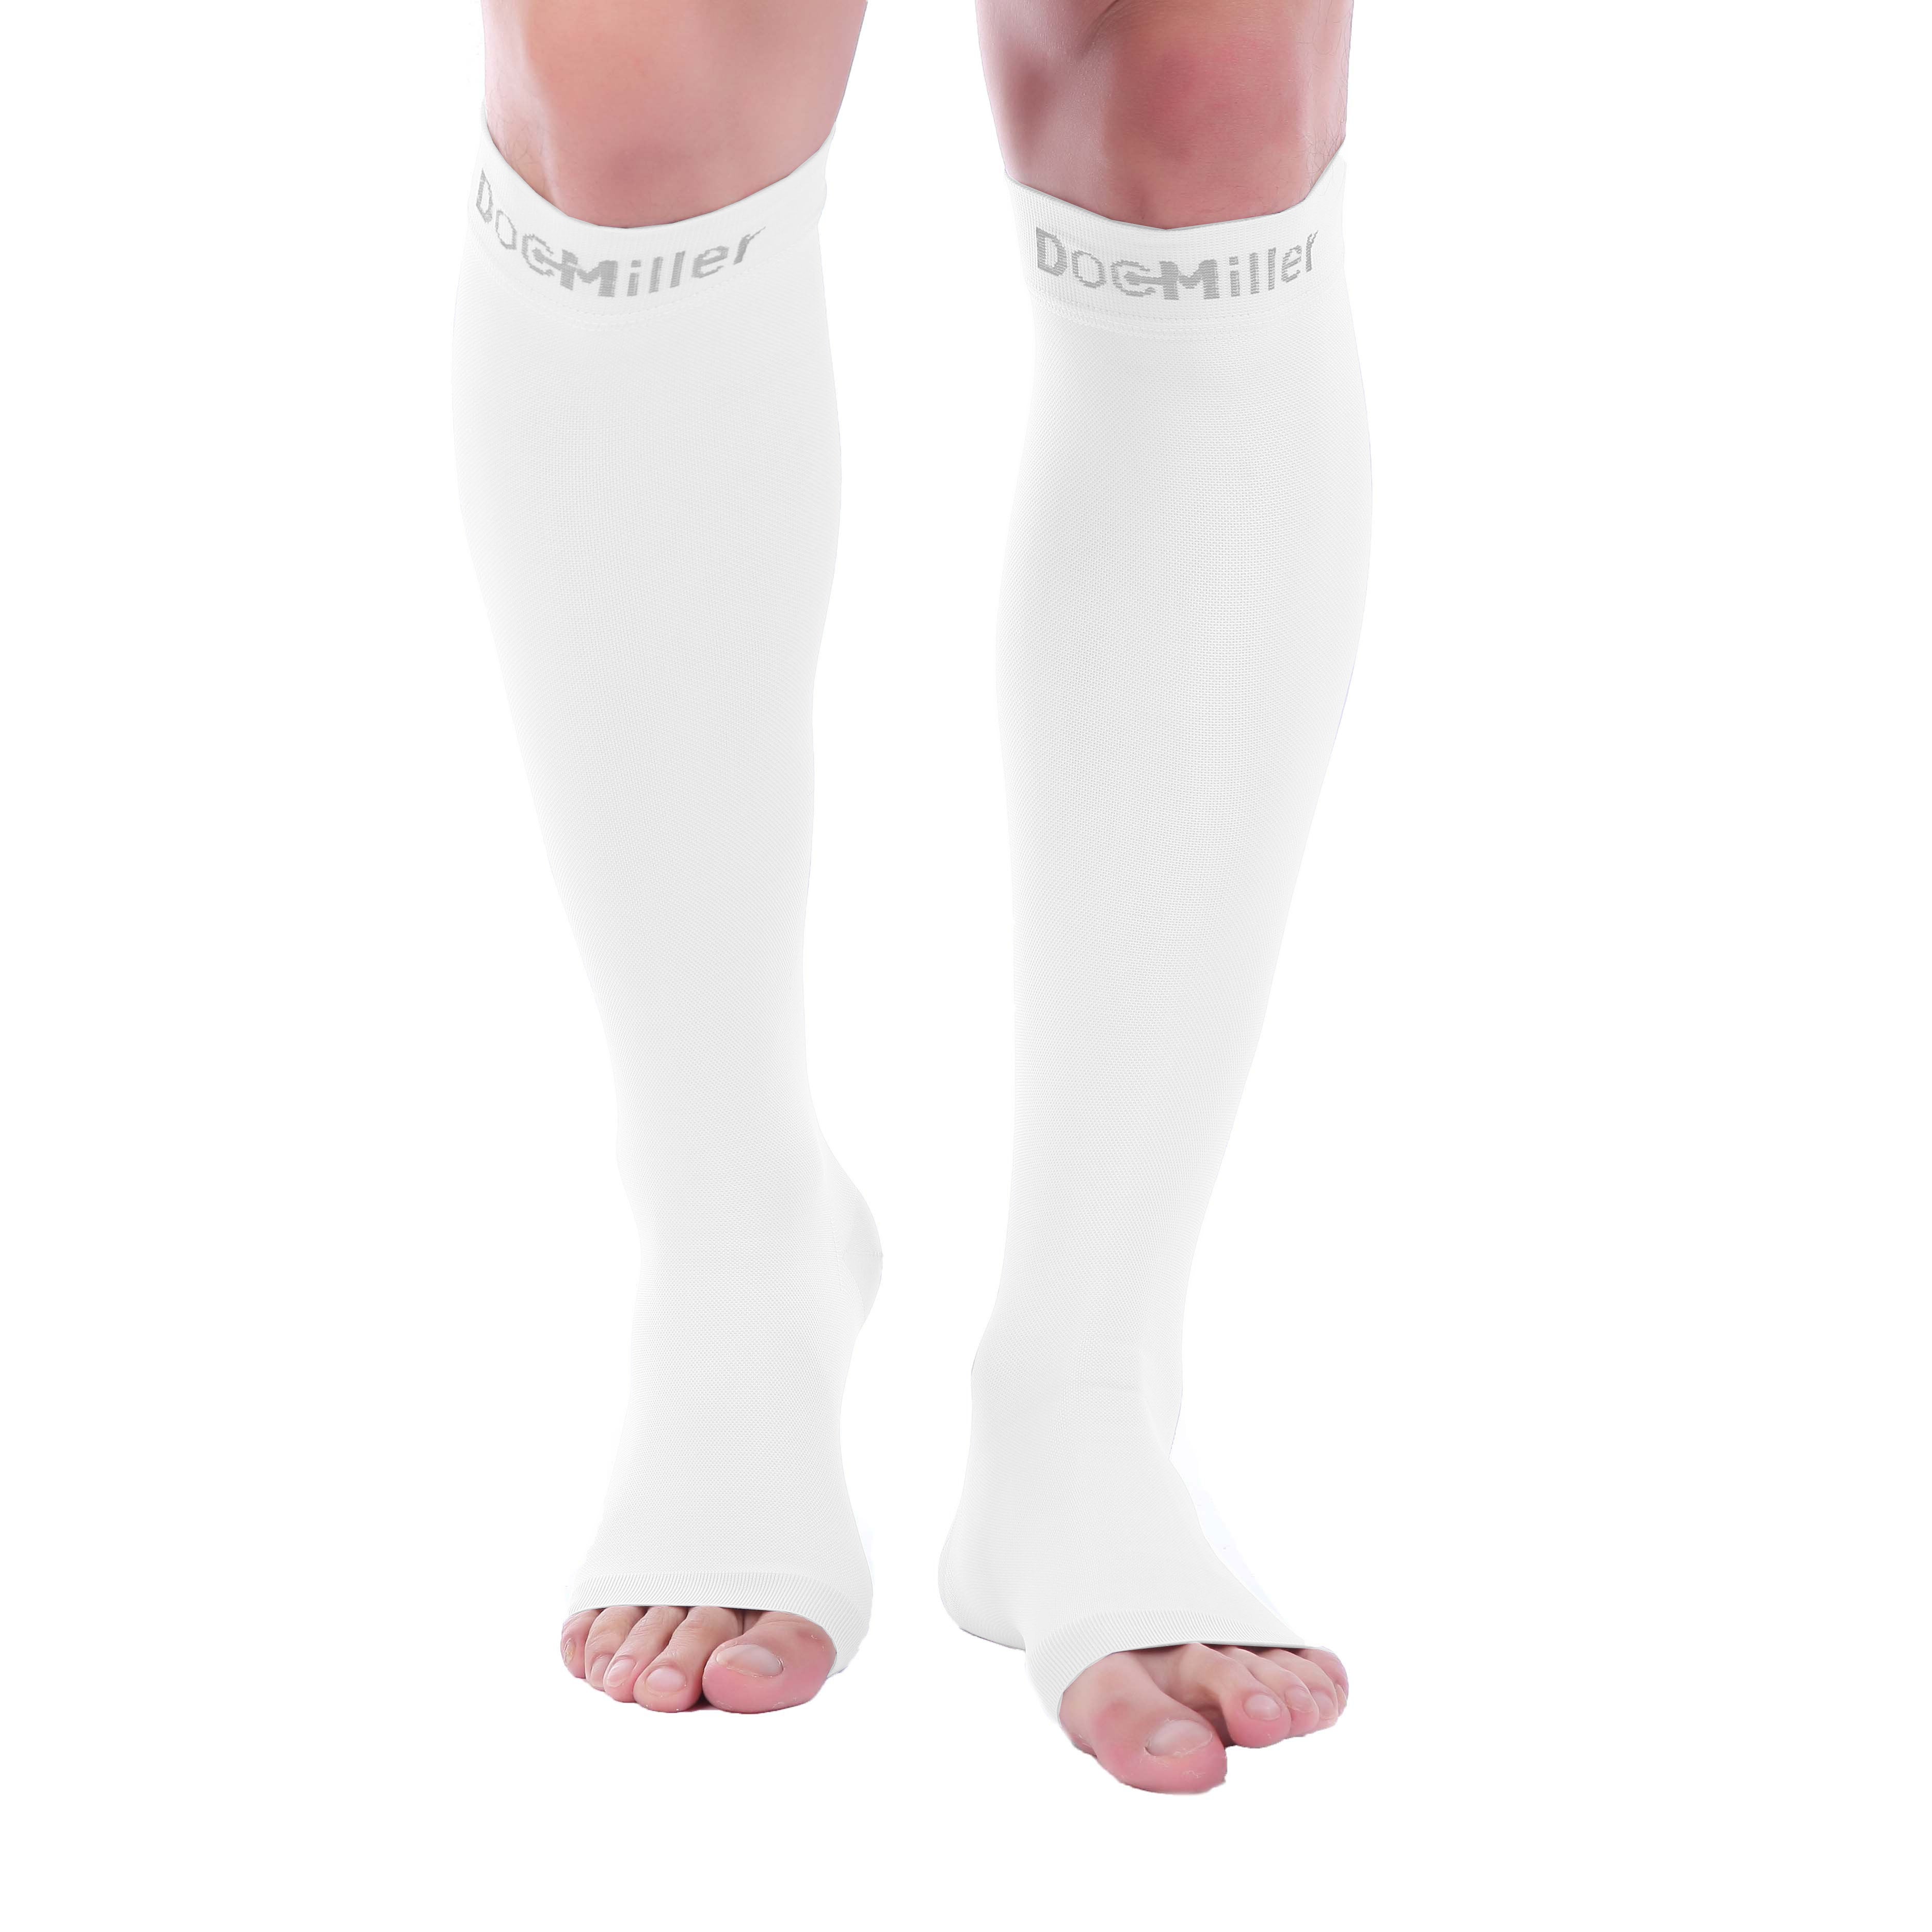 Open Toe Compression Sleeve 15-20 mmHg WHITE by Doc Miller